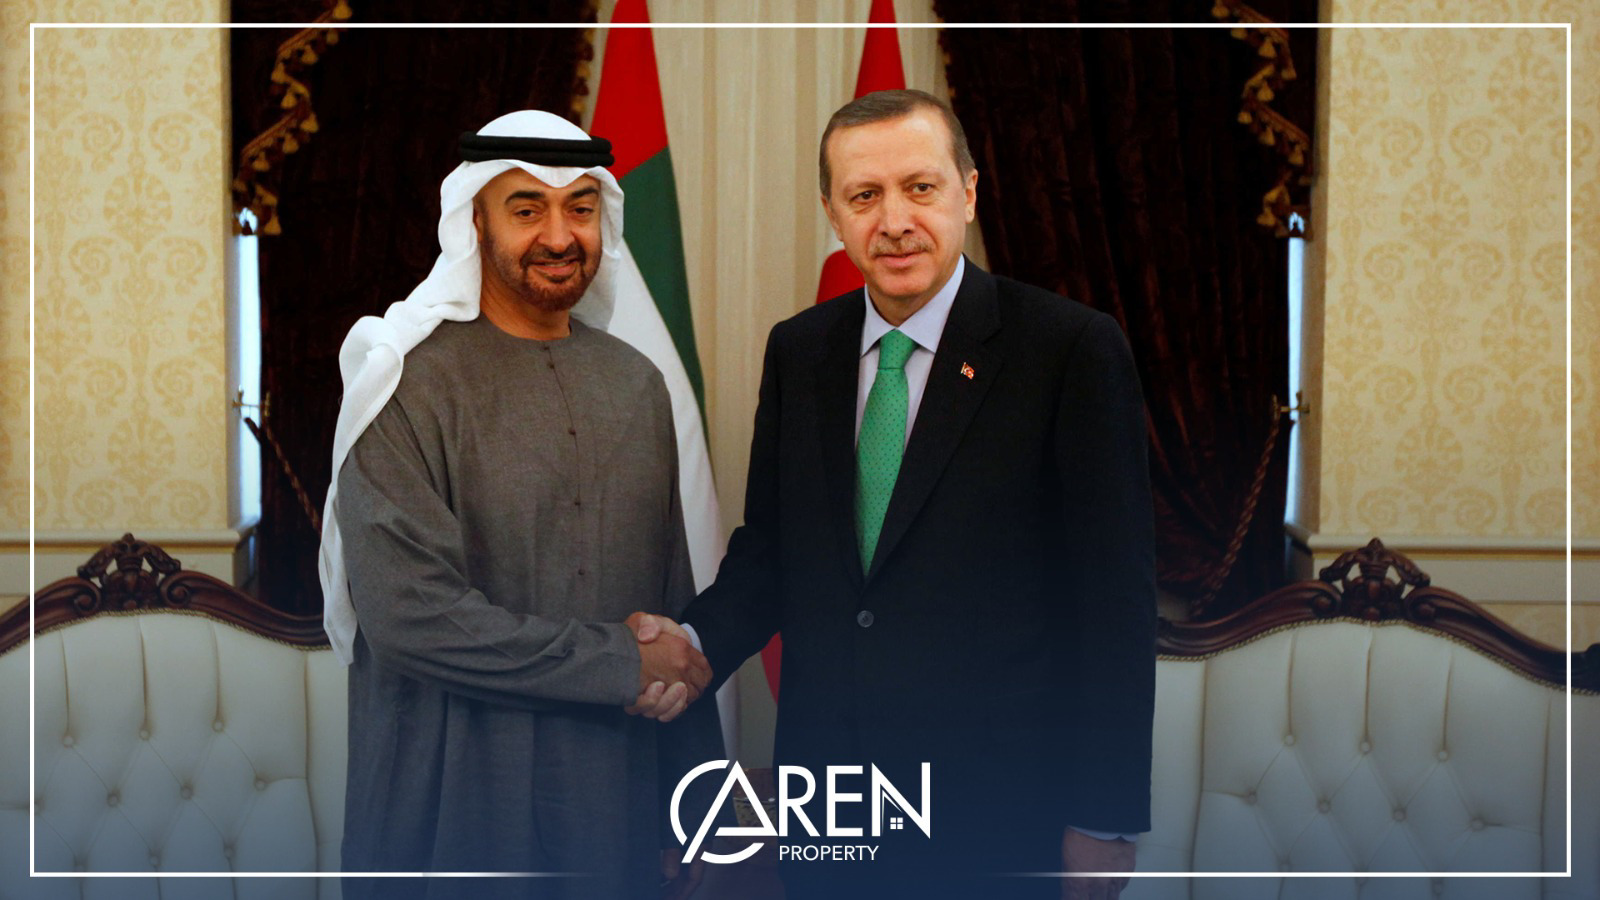 sheikh-mohammed-bin-zayed-al-nahyan-stresses-the-keenness-of-the-uae-to-strengthen-the-partnership-with-the-republic-of-turkey